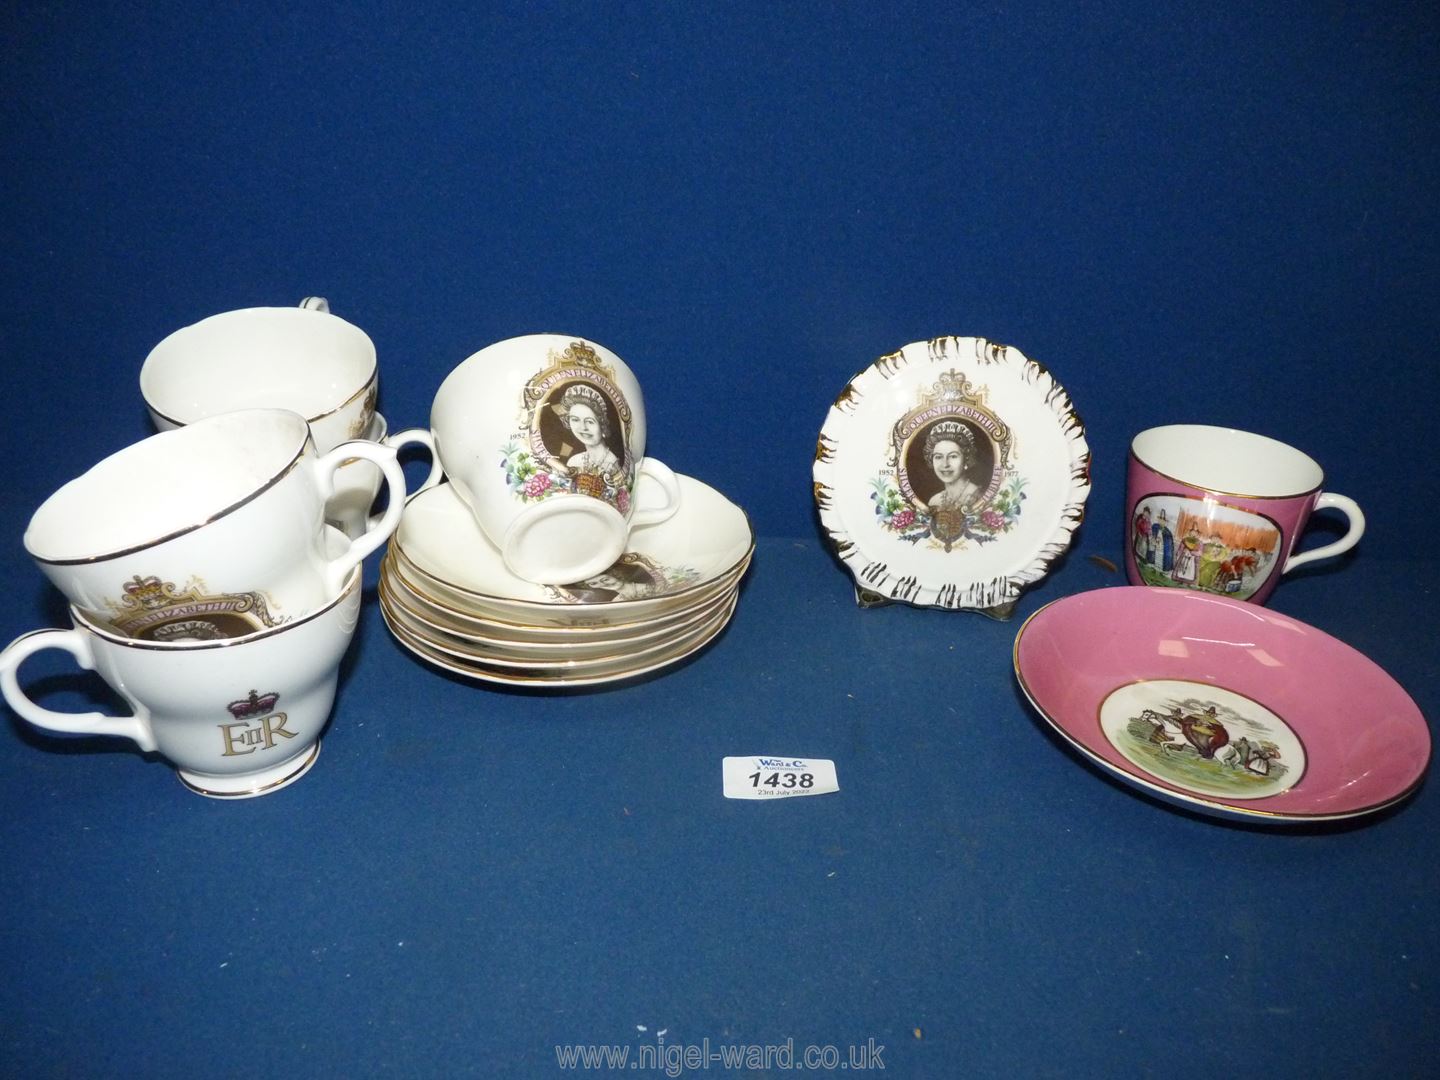 Five Liverpool Road pottery china cups and saucers celebrating the silver jubilee plus a plaque and